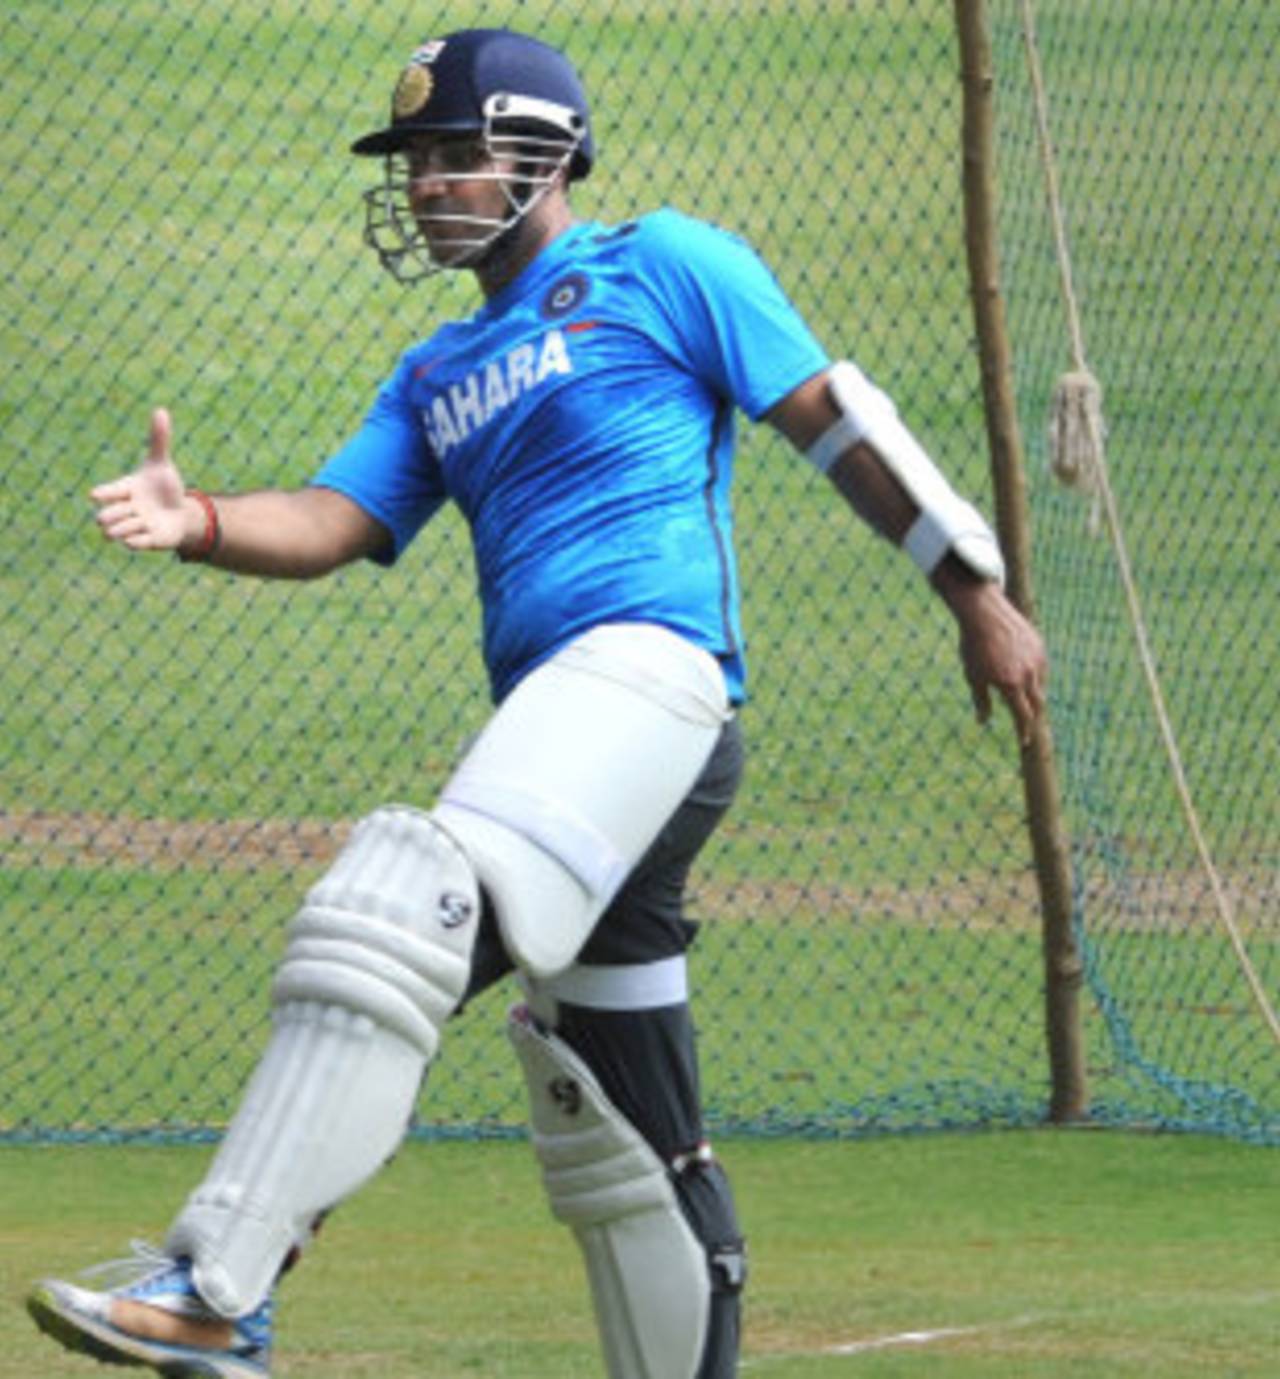 Virender Sehwag, in his new spectacles, trains at India's conditioning camp in Bangalore, February 17, 2013